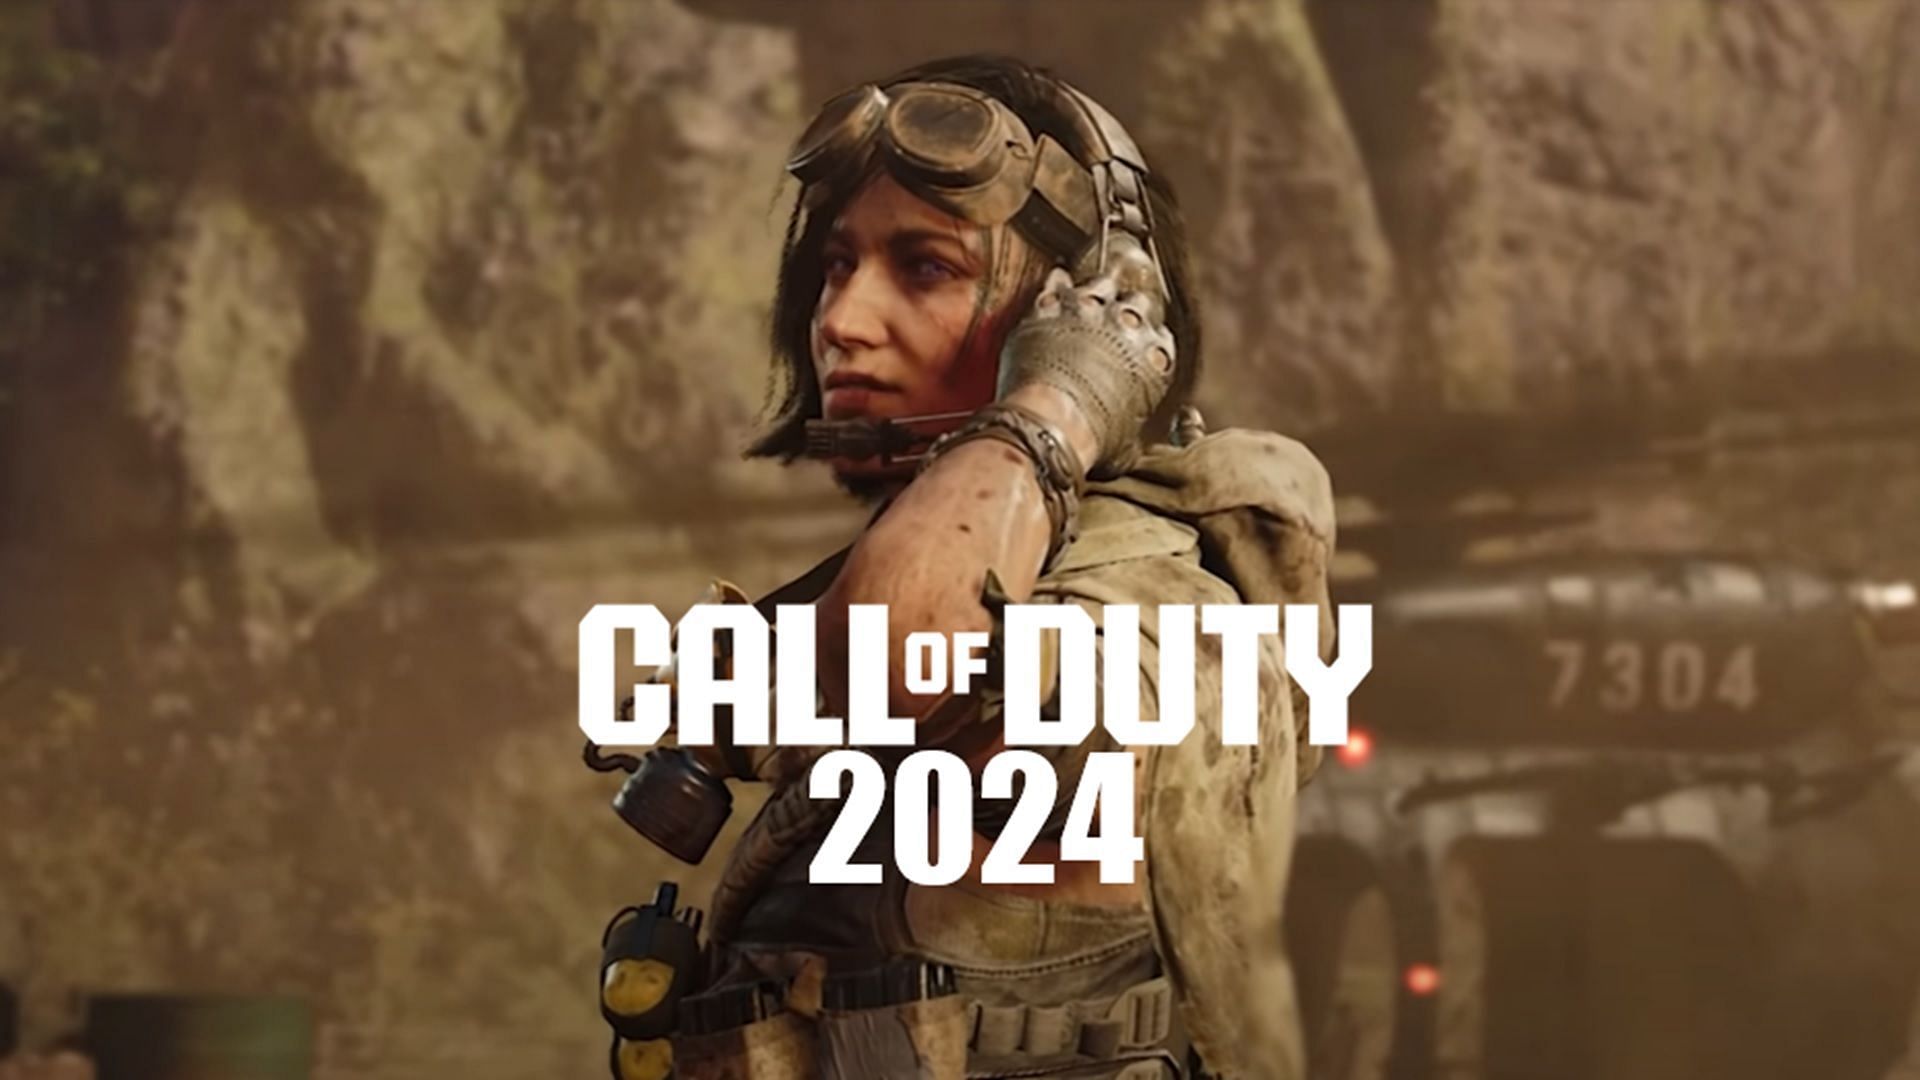 CoD 2024 Black Ops 5 may not require too much horsepower on low end PCs